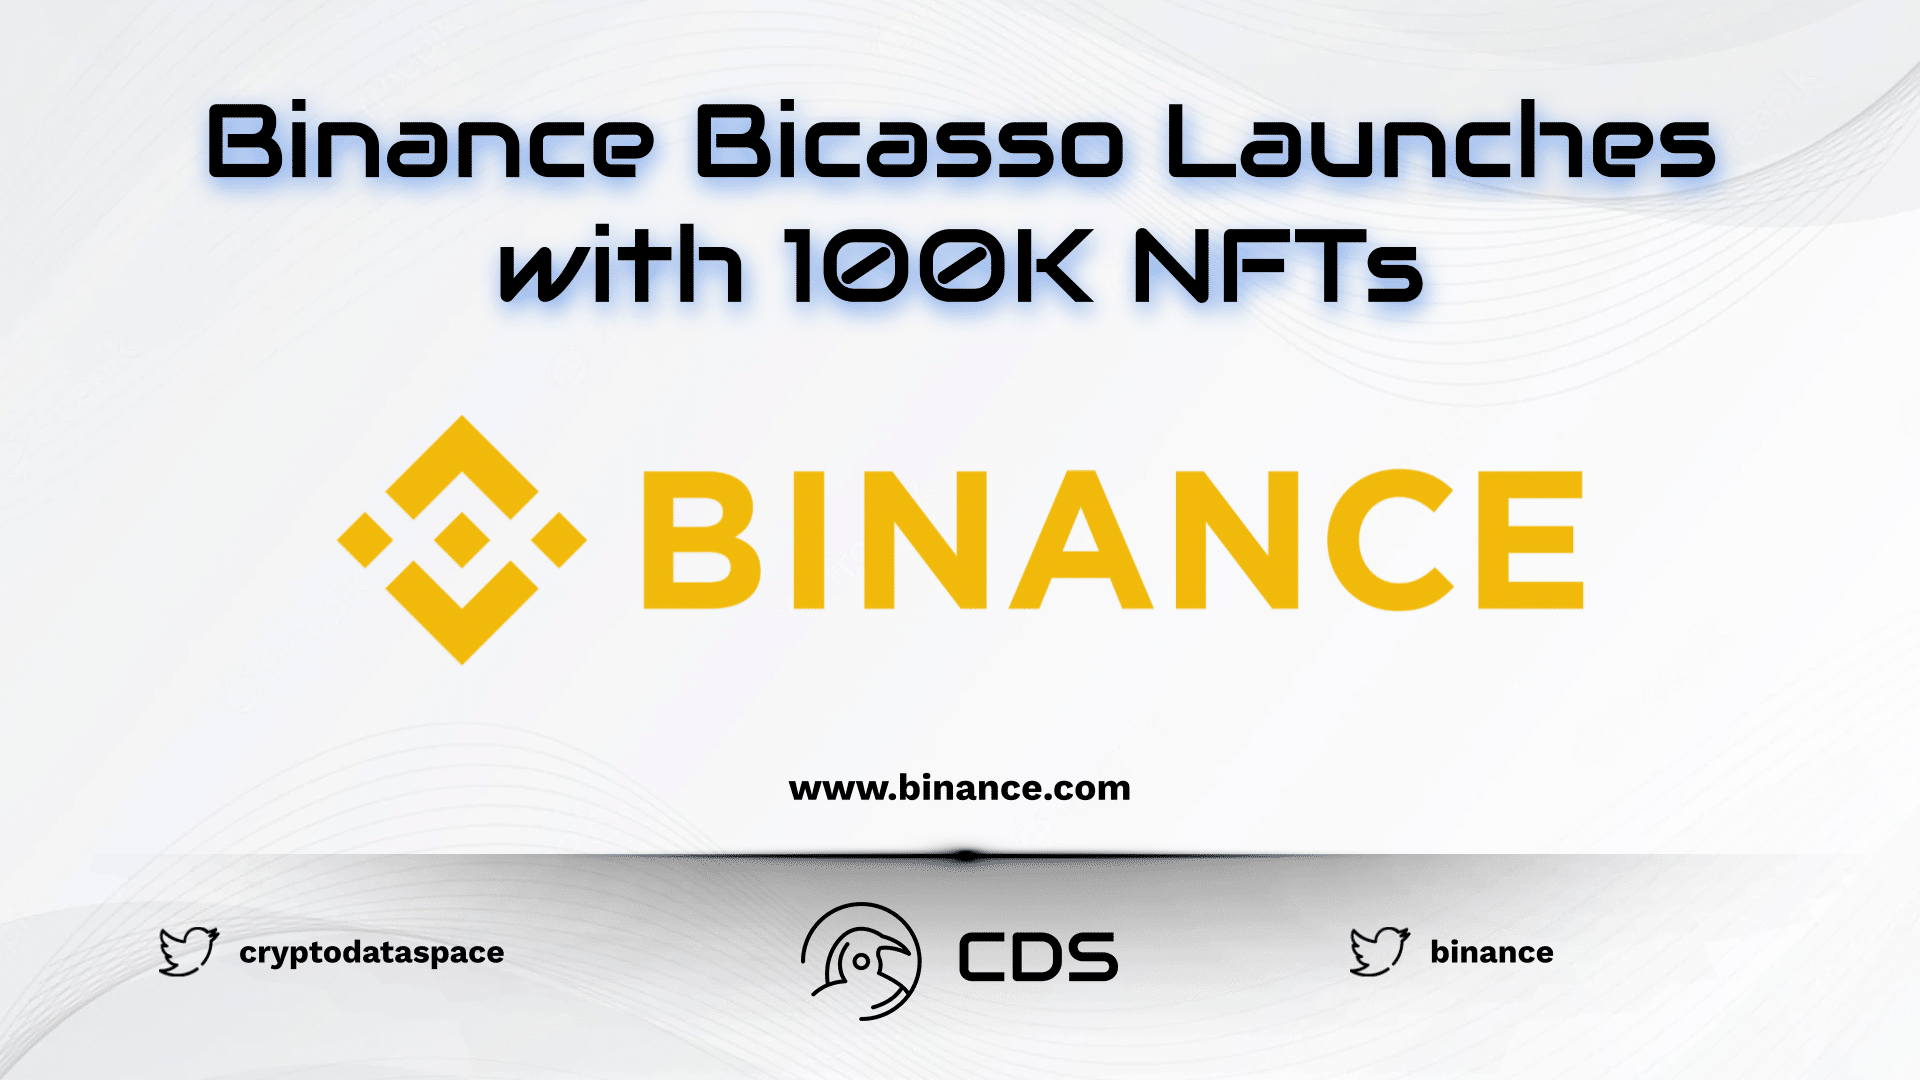 Binance Bicasso Launches with 100K NFTs